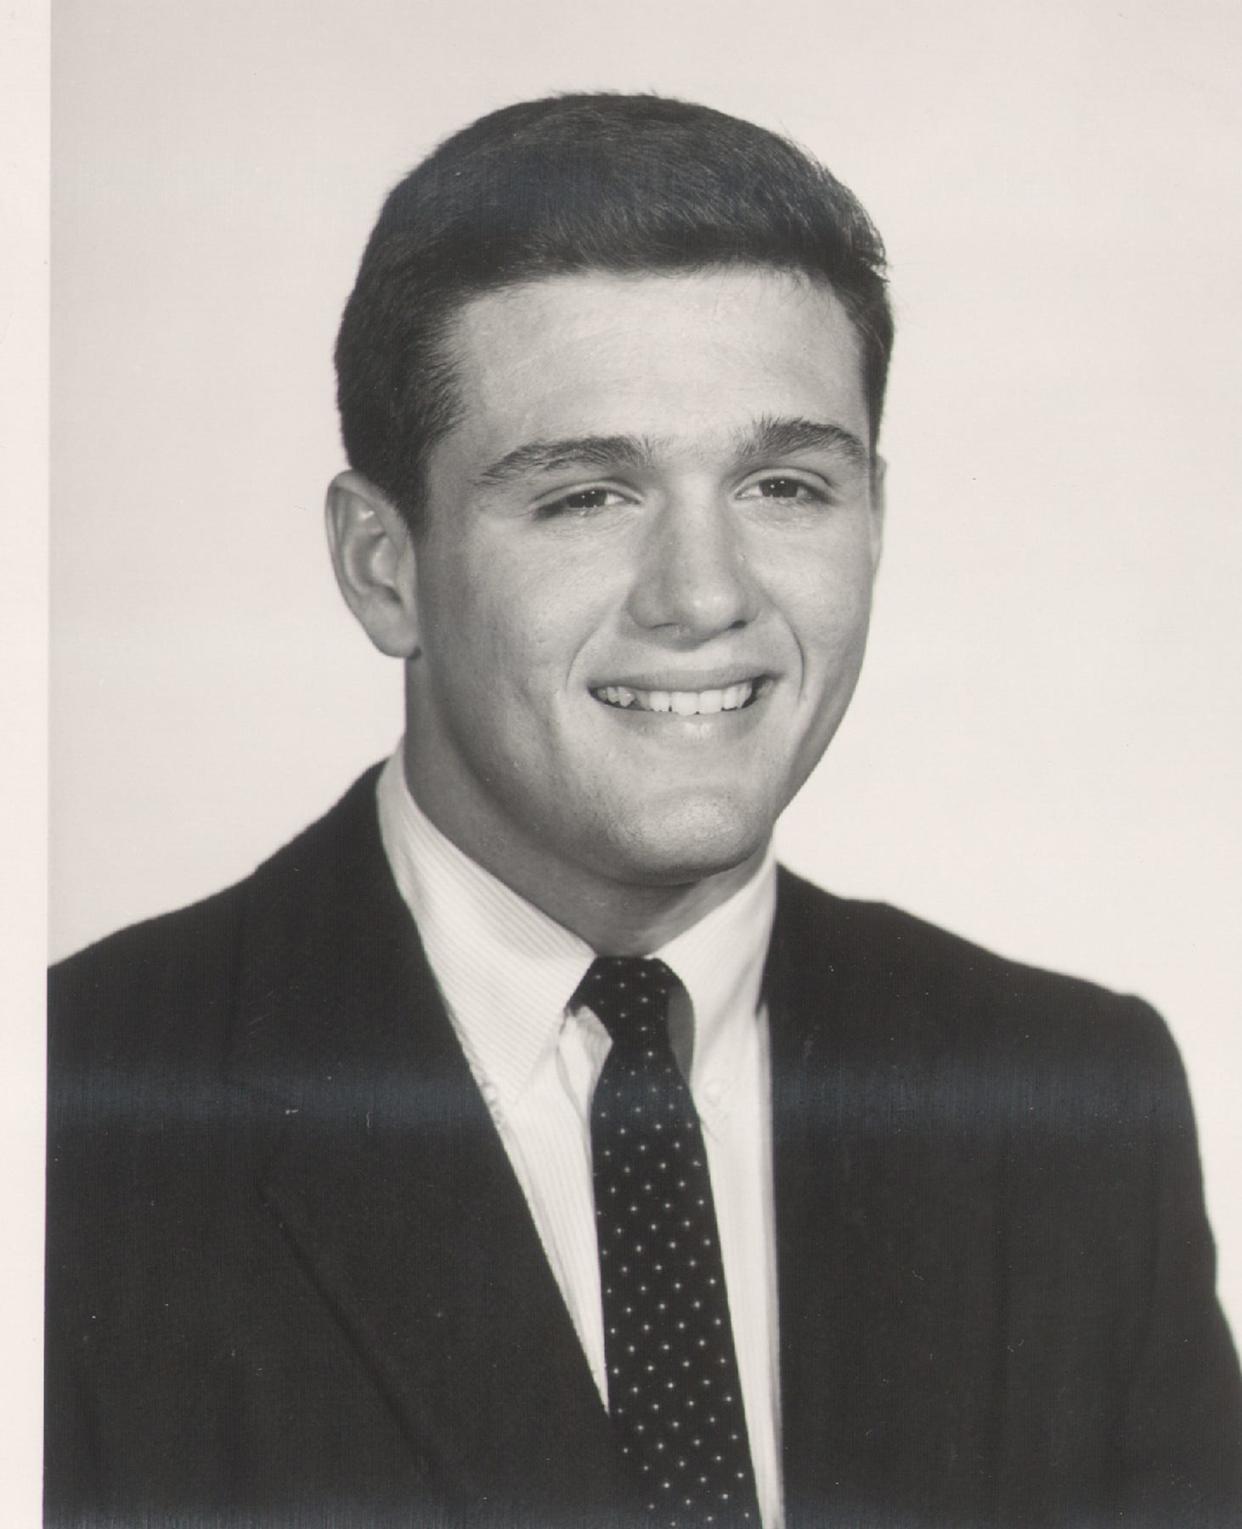 Don Leebern was a student-athlete at the University of Georgia and later served on the UGA athletic board and was a long-time appointee of the Board of Regents.